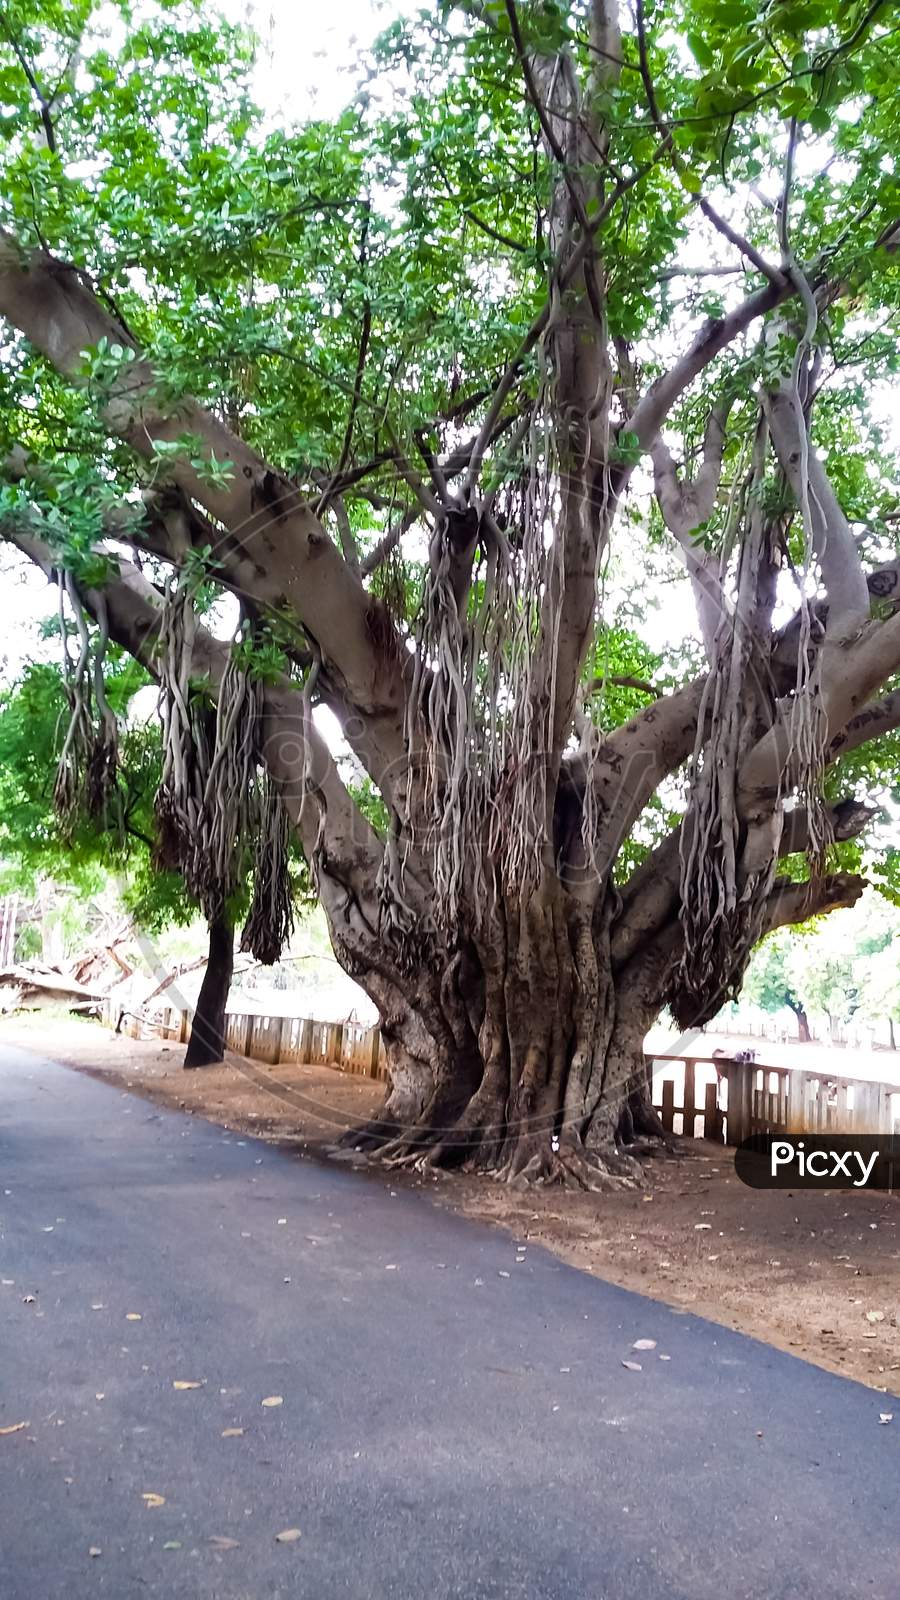 Big Banyan tree with hung roots beside street